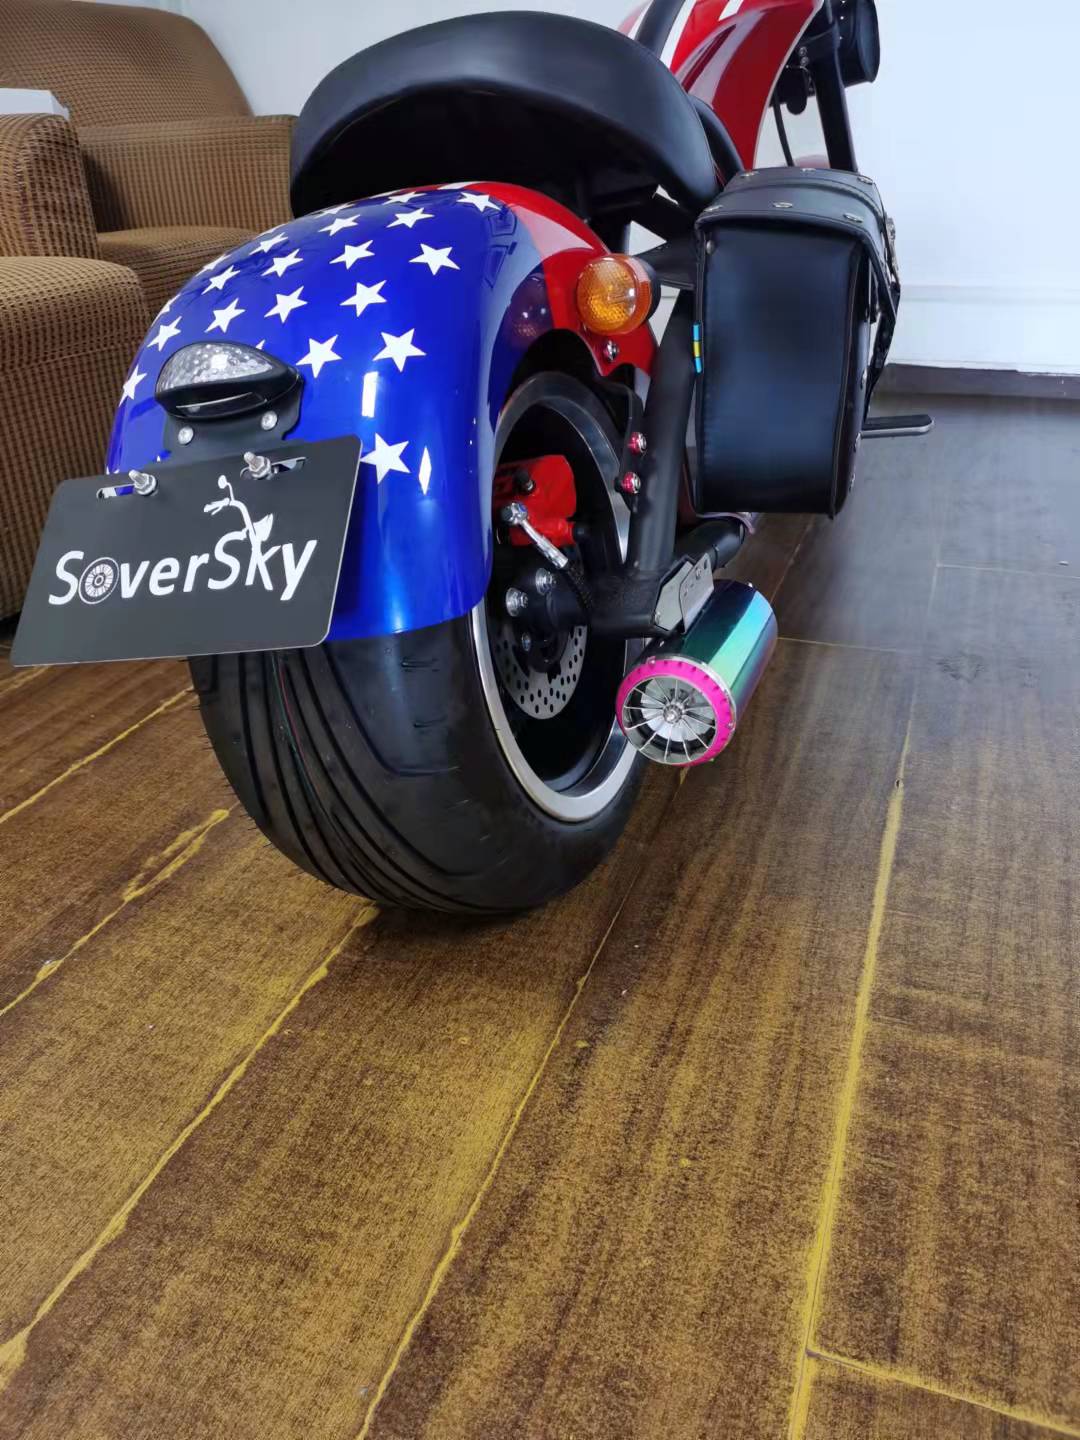 soversky 2000w electric fat tire scooter M1 with bluetooth speaker